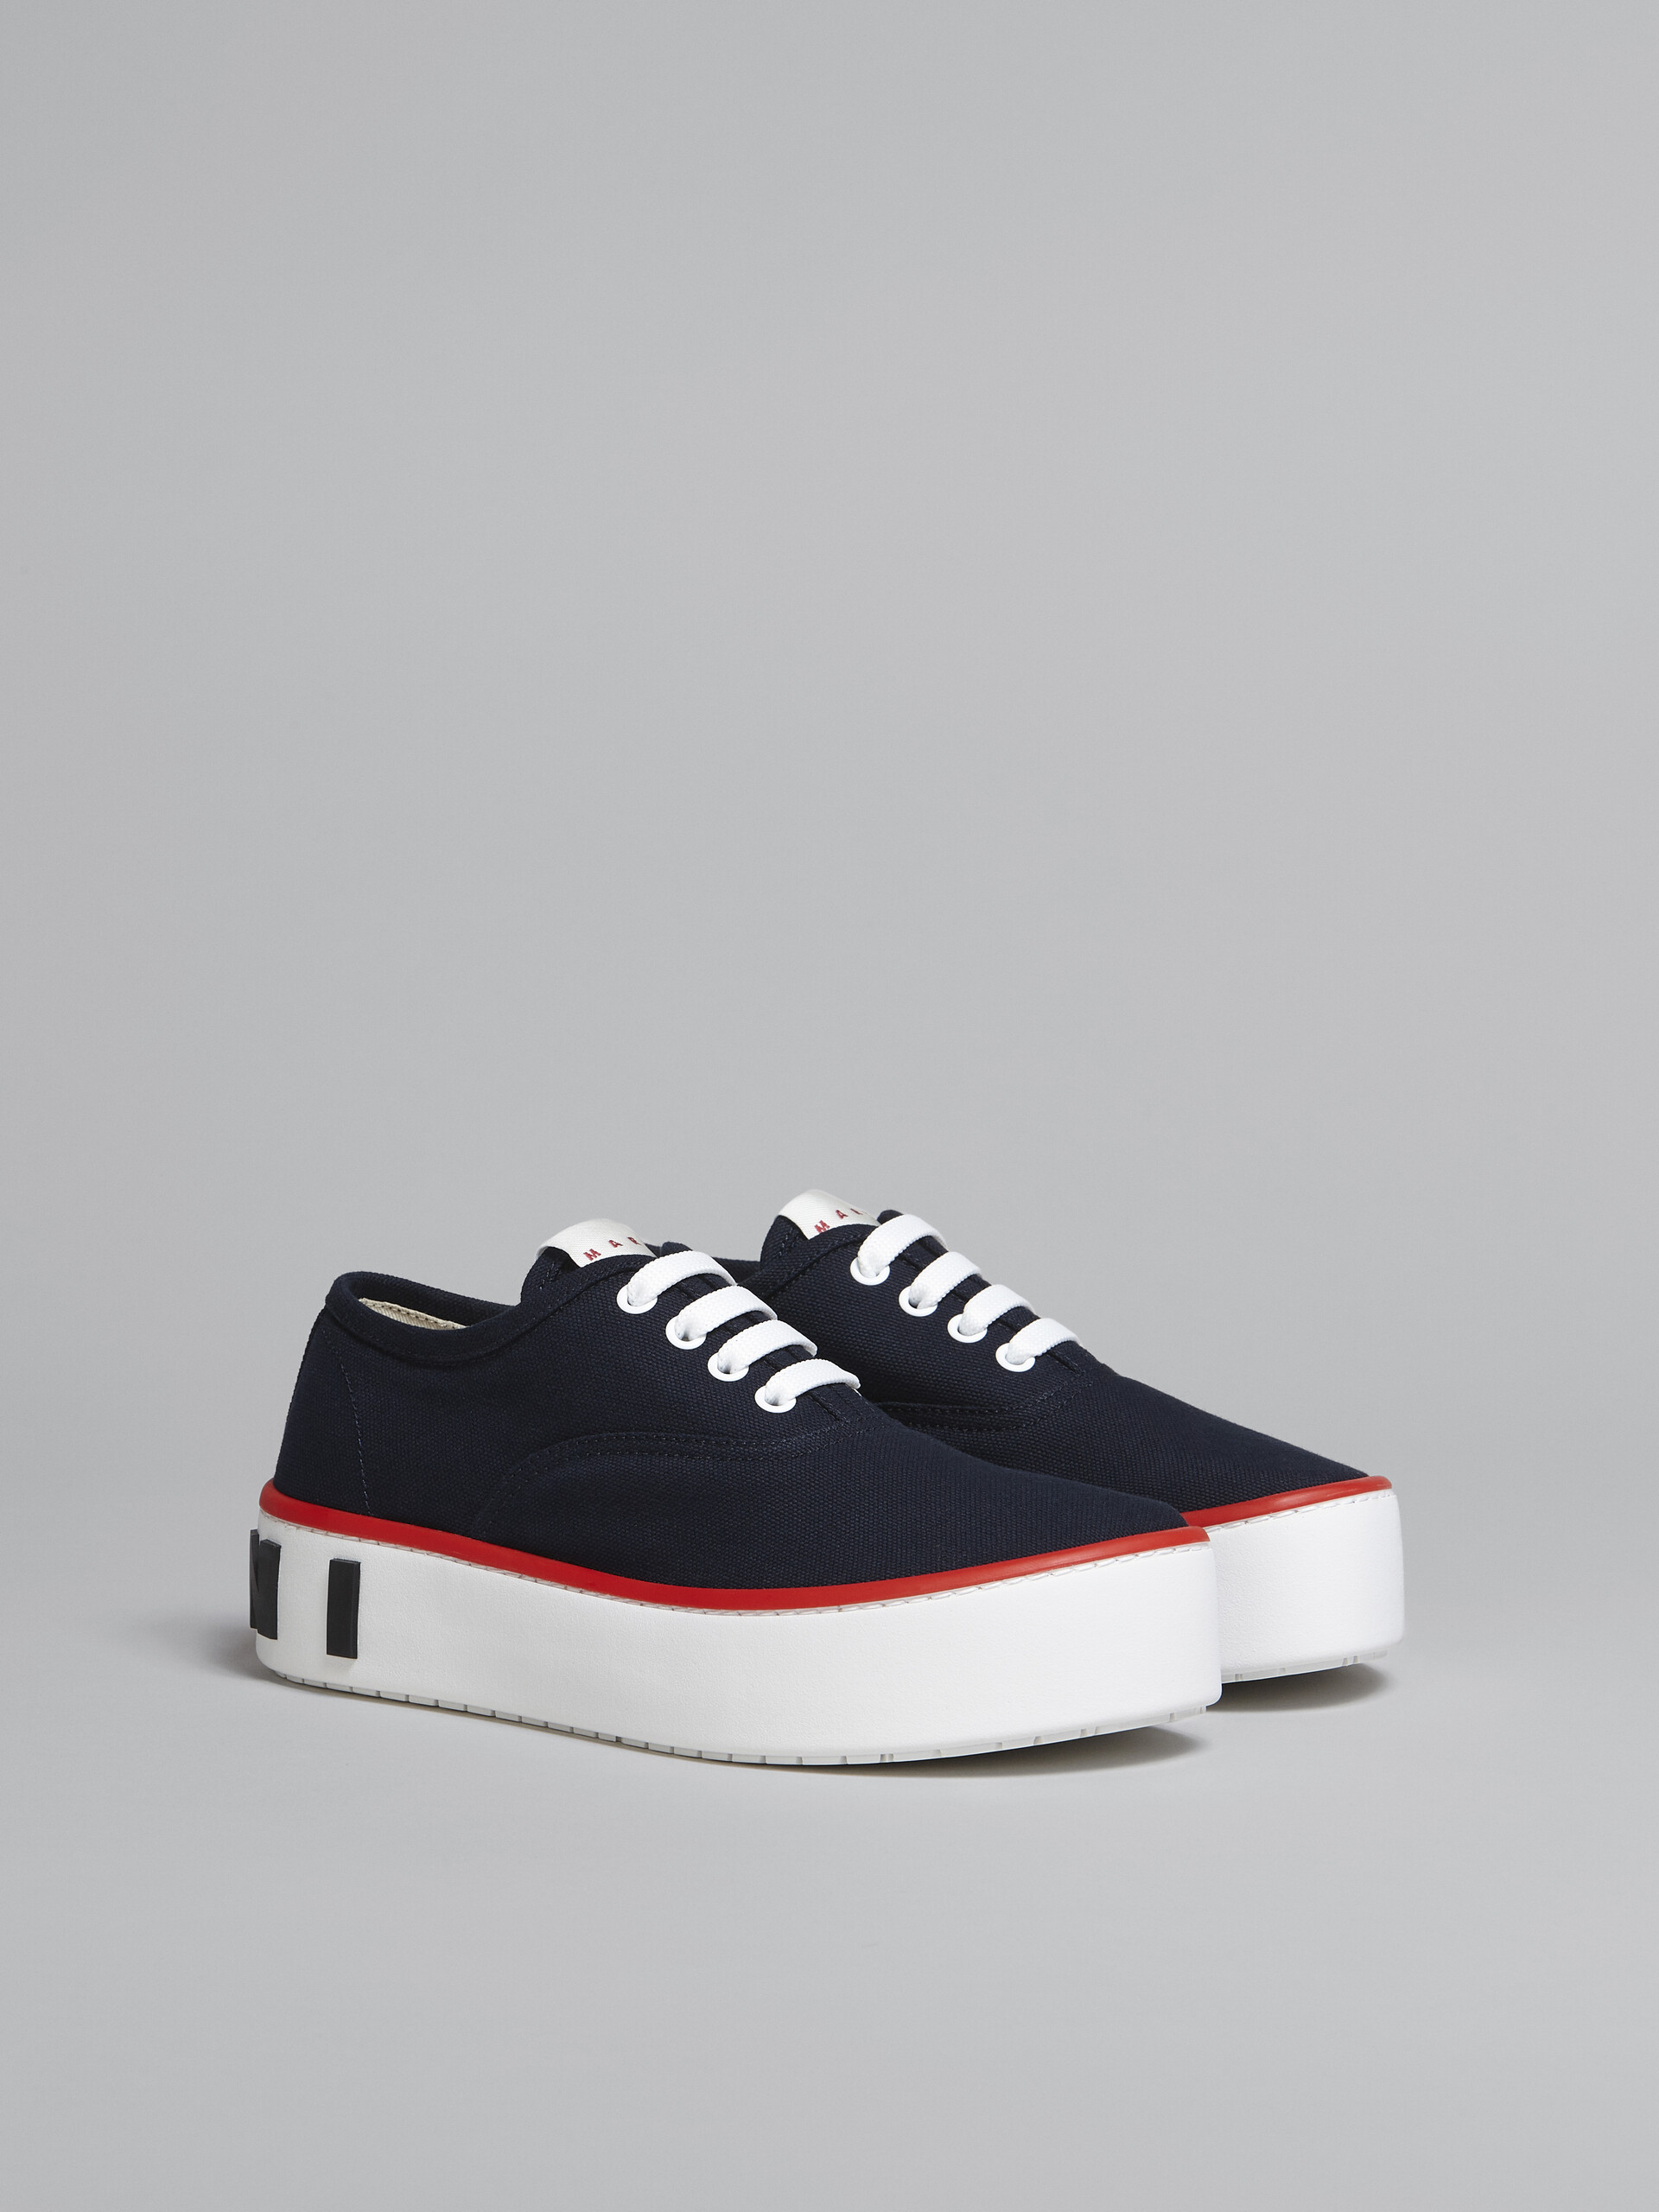 Blue canvas slip-on PAW sneaker with back maxi logo - Sneakers - Image 2